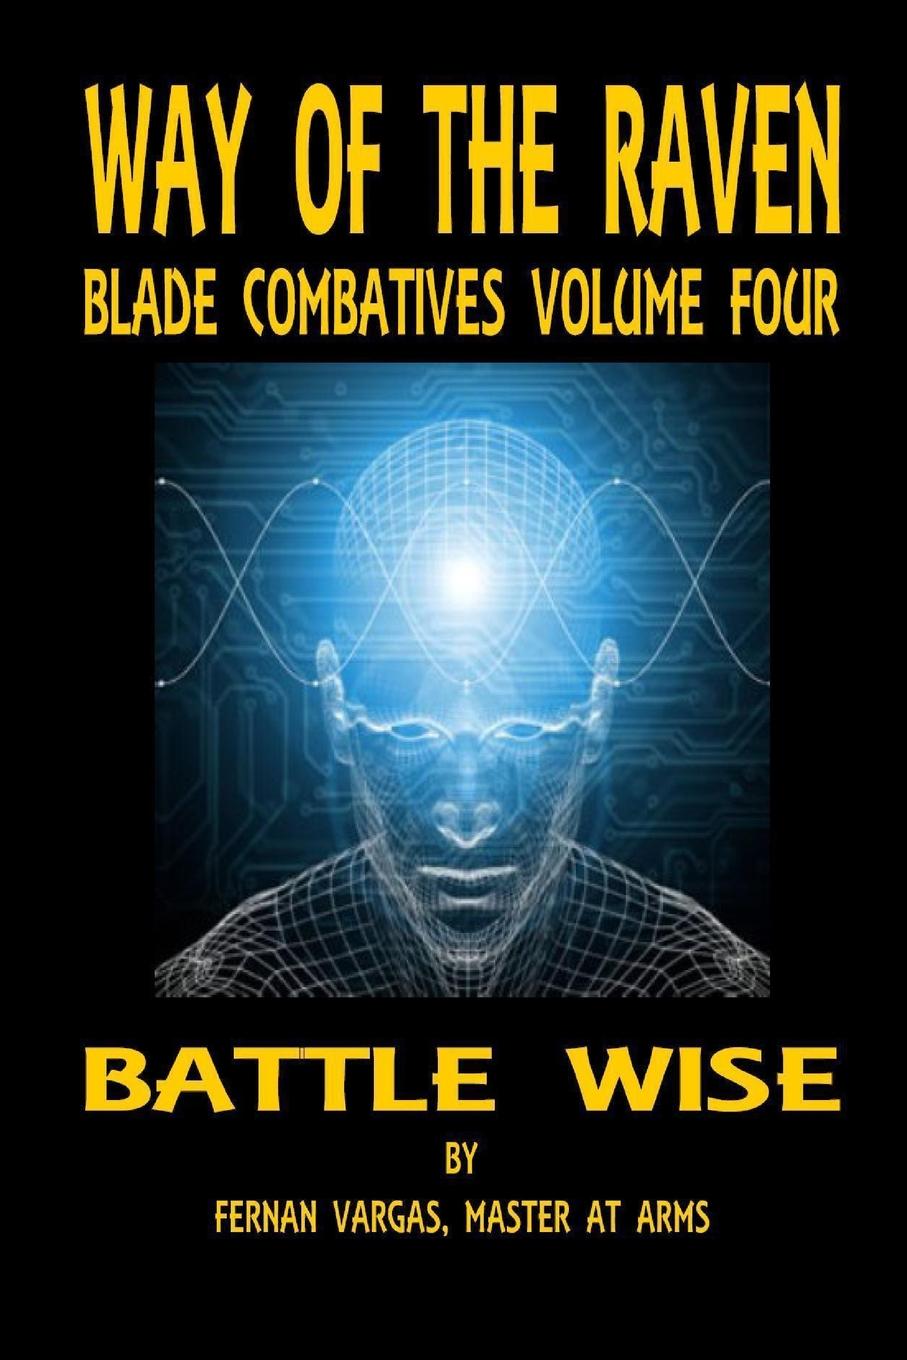 Way of the Raven Blade Combatives Volume 4. Battle Wise